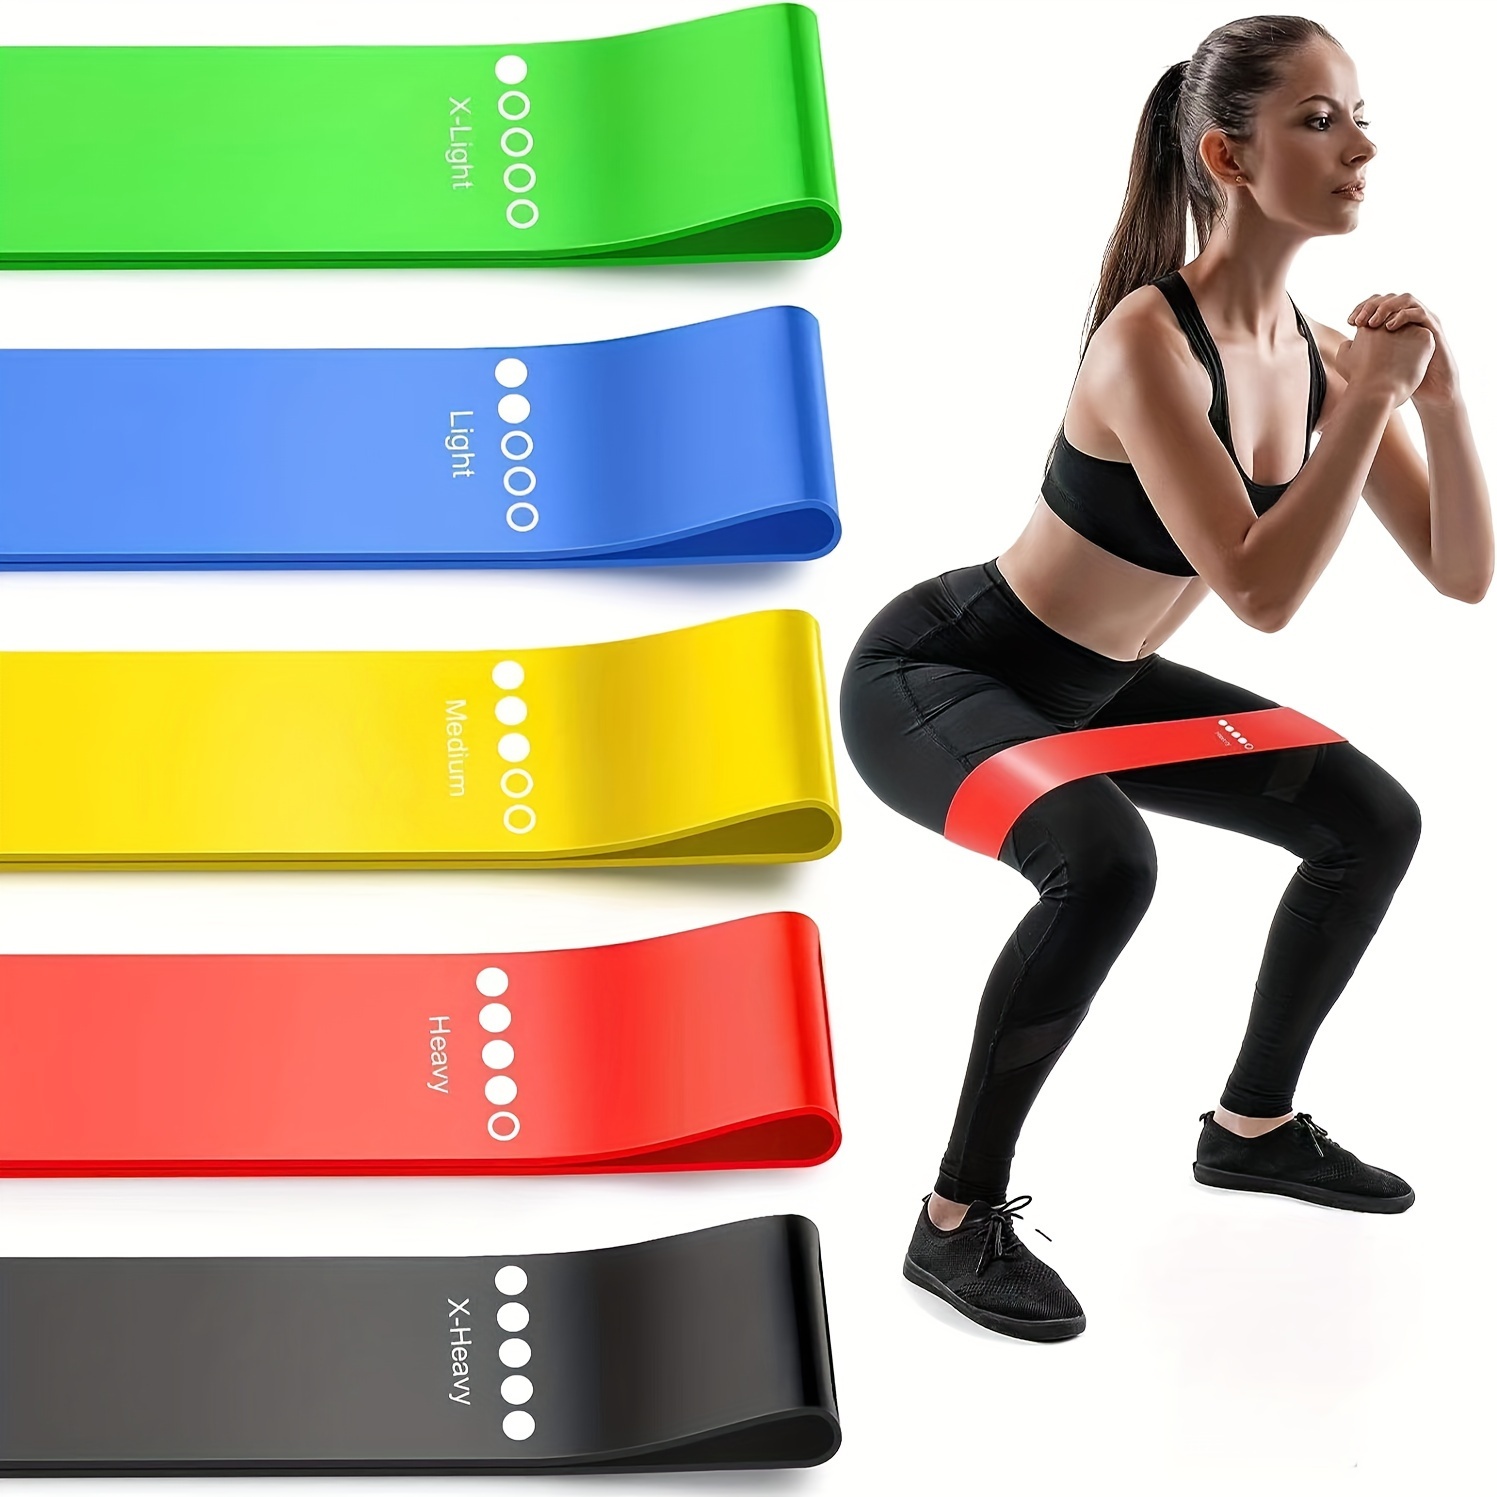 5pcs Resistance Bands, Exercise Workout Bands, Stretching Bands For Booty &  Legs, Elastic Resistance Bands For Full Body Workouts - Portable Fitness T